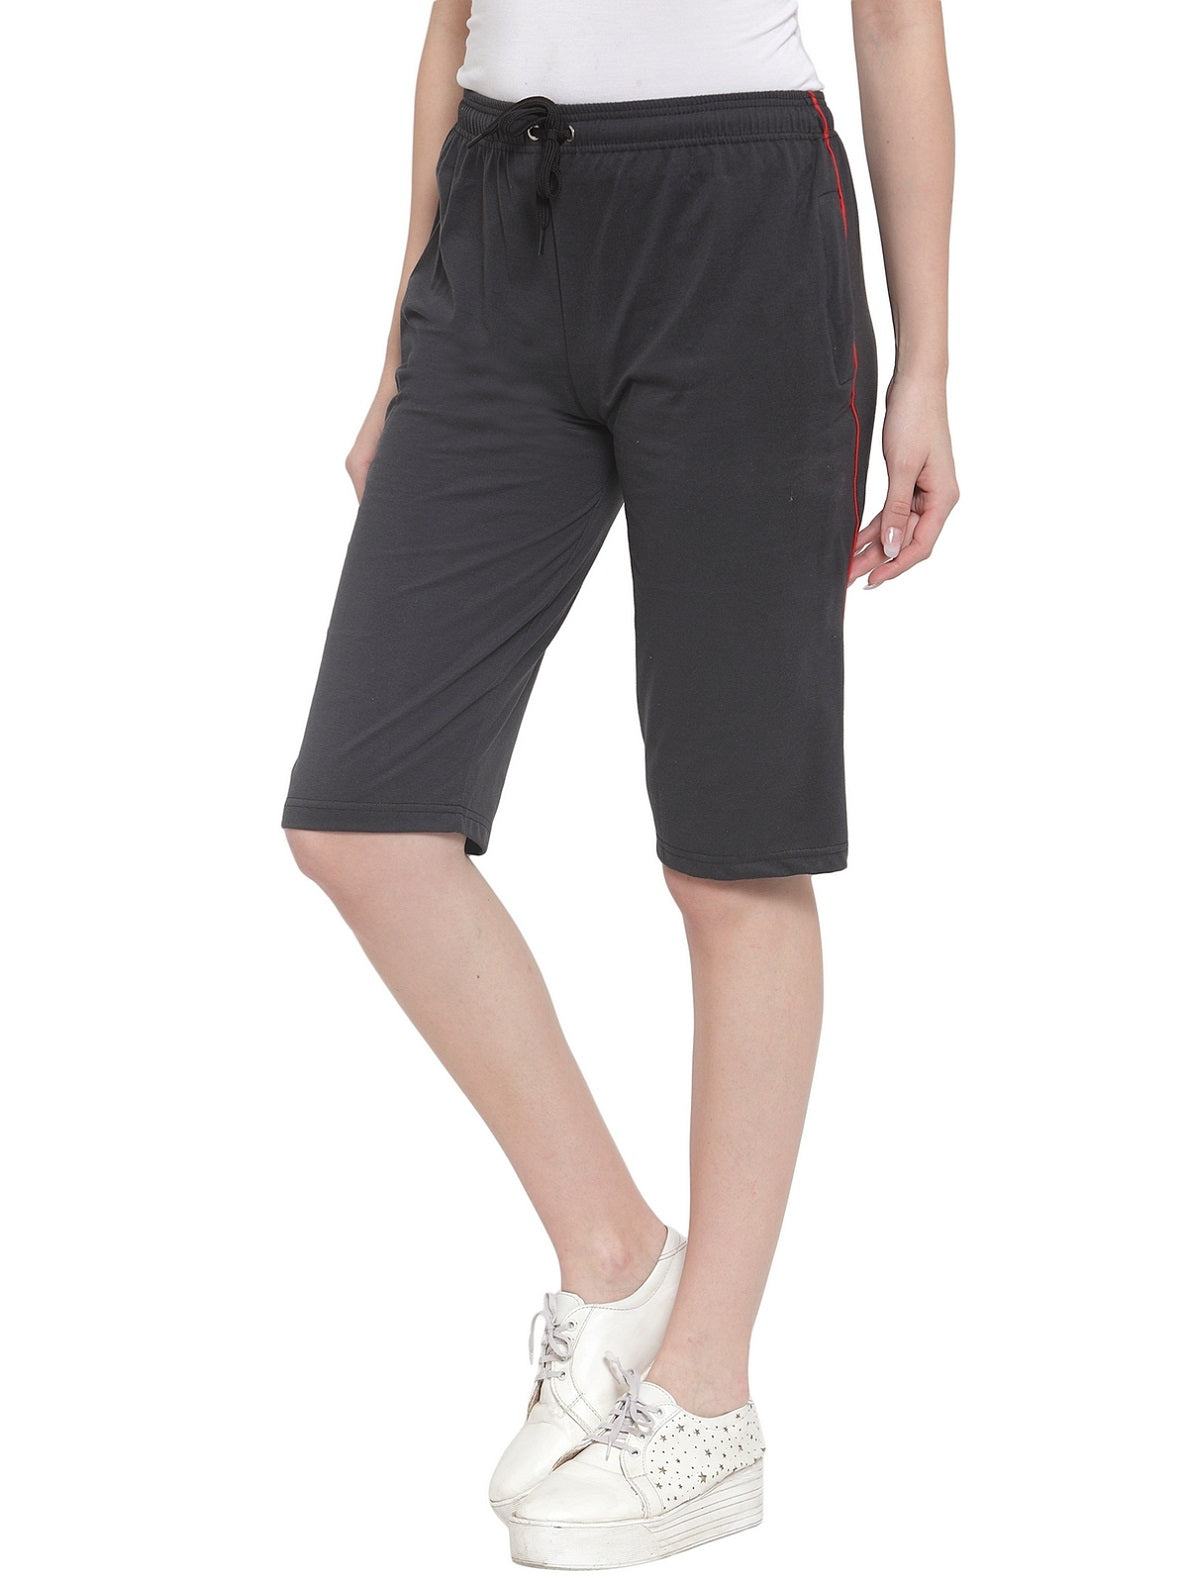 Women's Cotton Three Fourth Capri Shorts With Two Zippered Pockets